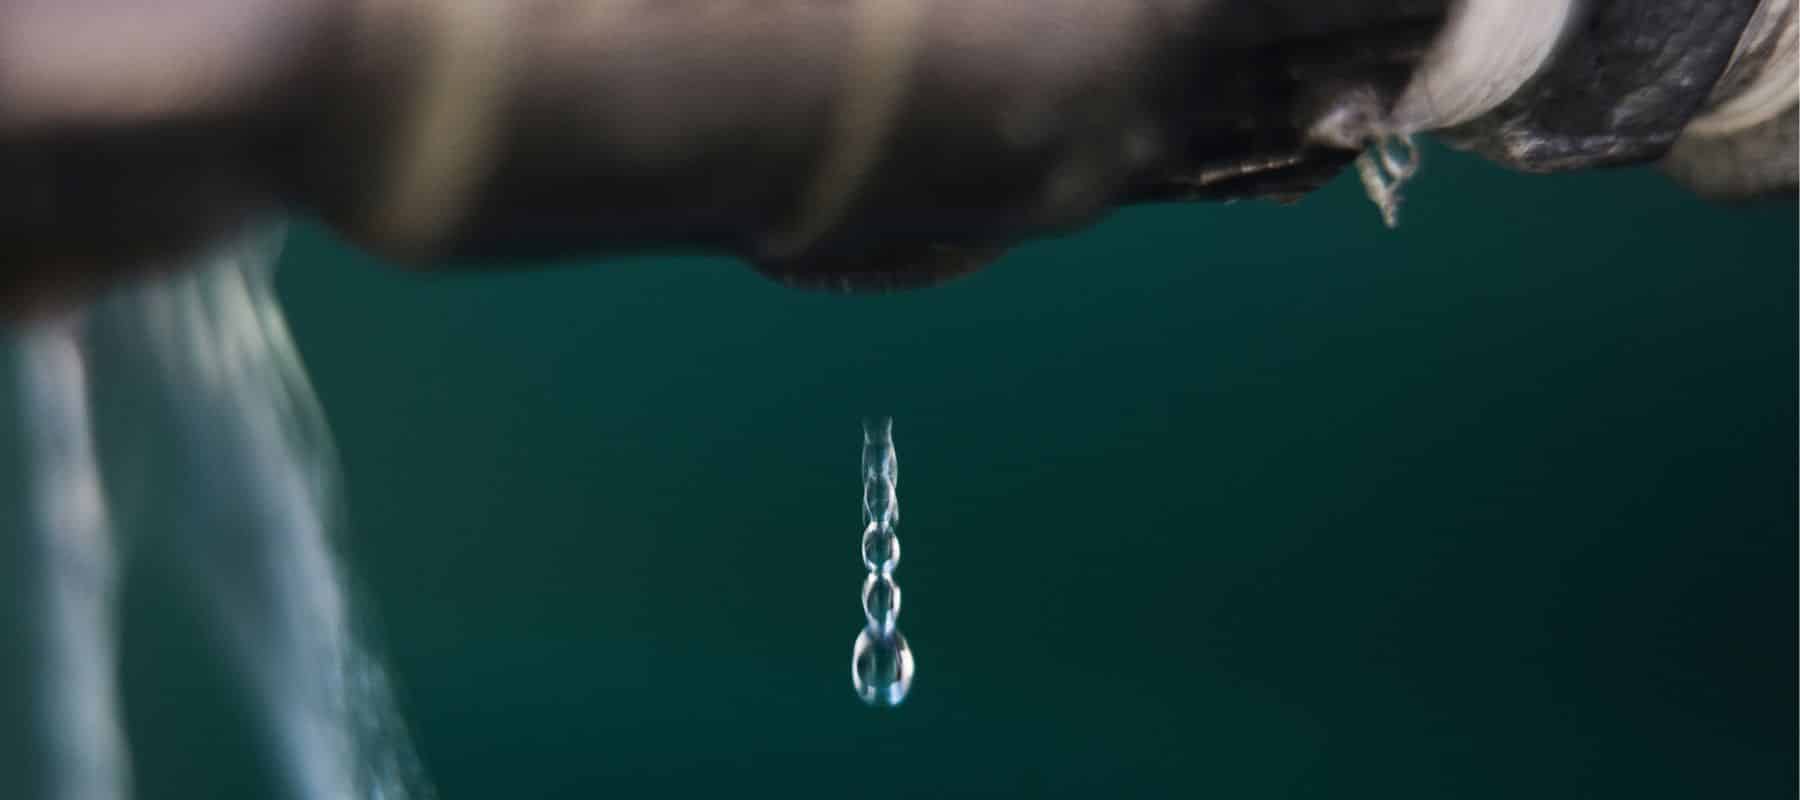 water droplet leaking out of a pipe